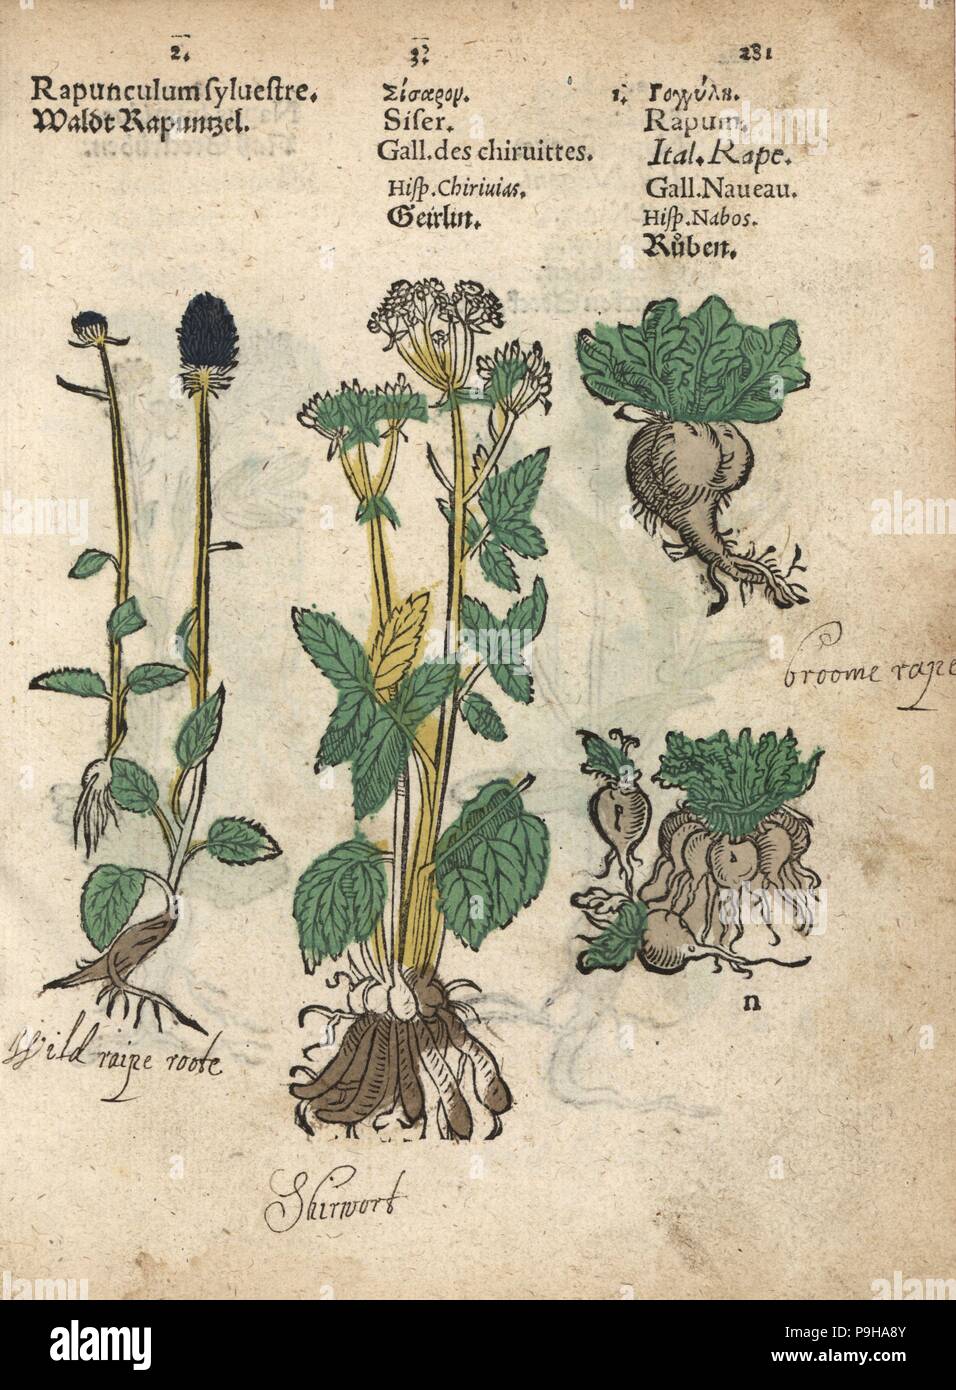 Spiked rampion, Phyteuma spicatum, skirret, Sium sisarum, and turnip, Brassica rapa. Handcoloured woodblock engraving of a botanical illustration from Adam Lonicer's Krauterbuch, or Herbal, Frankfurt, 1557. This from a 17th century pirate edition or atlas of illustrations only, with captions in Latin, Greek, French, Italian, German, and in English manuscript. Stock Photo